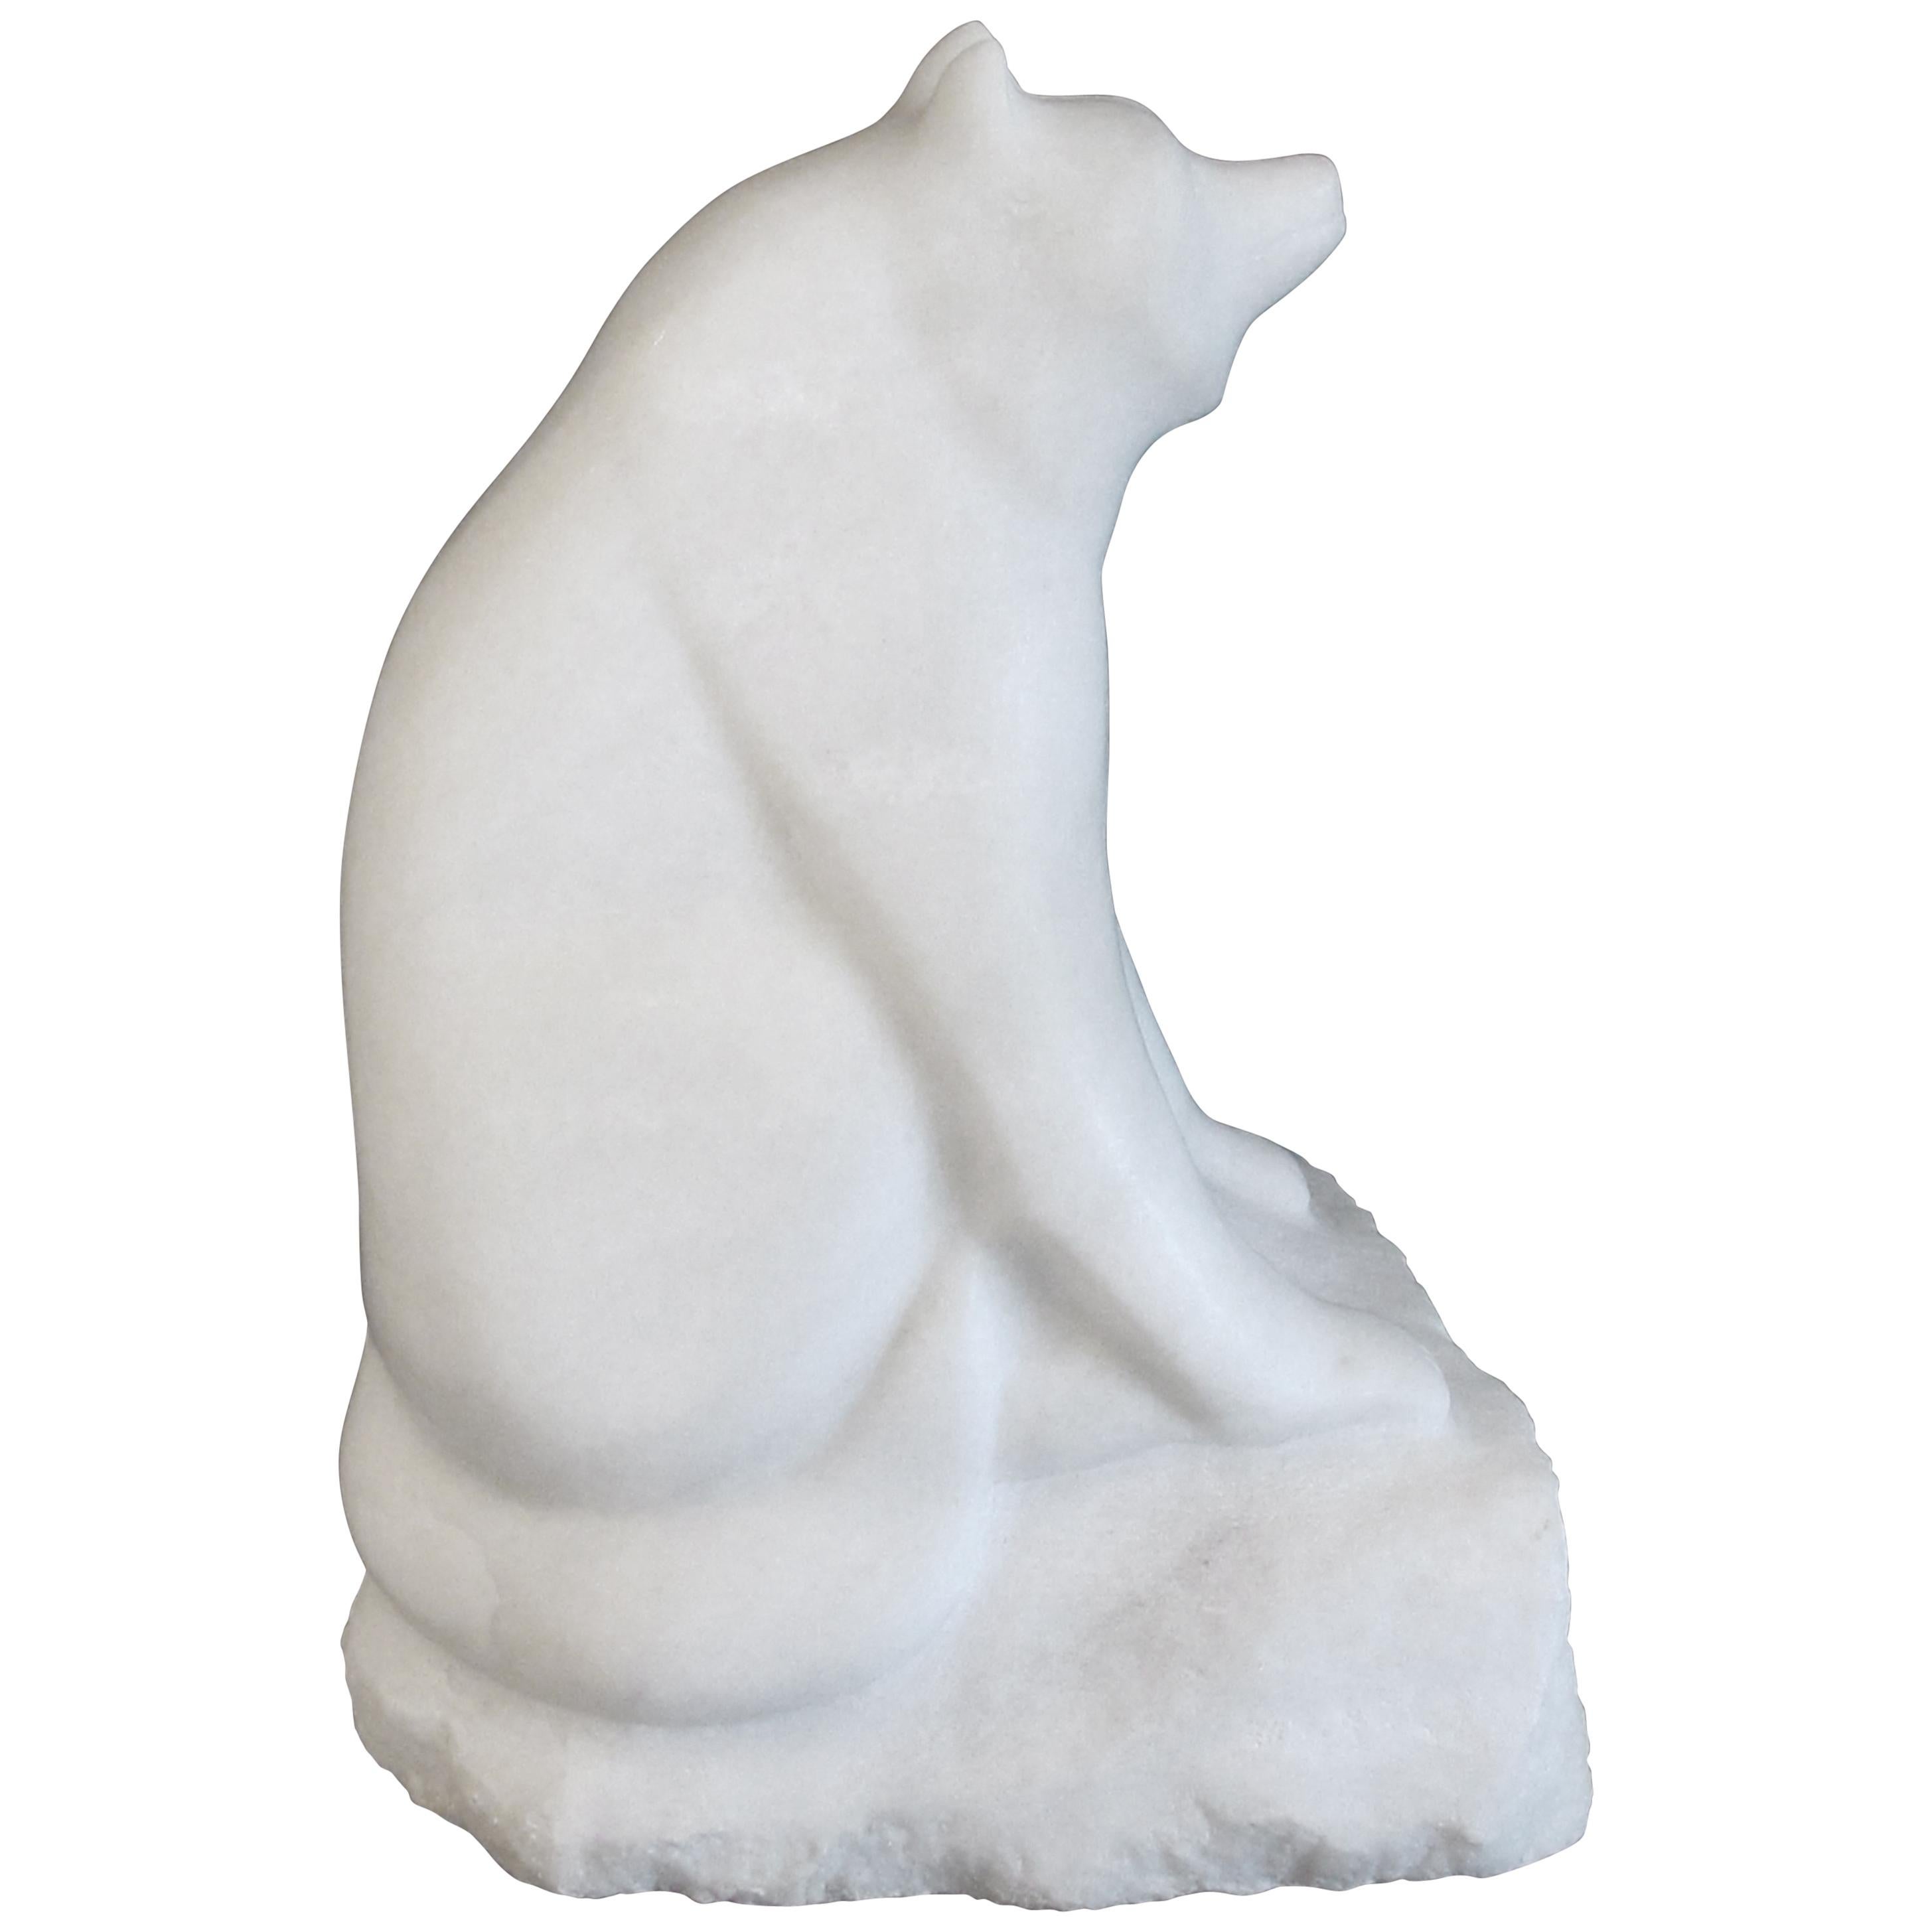 Large-Scaled Carved Marble Figure of a Red Panda with Its Distinctive Puffy Tail